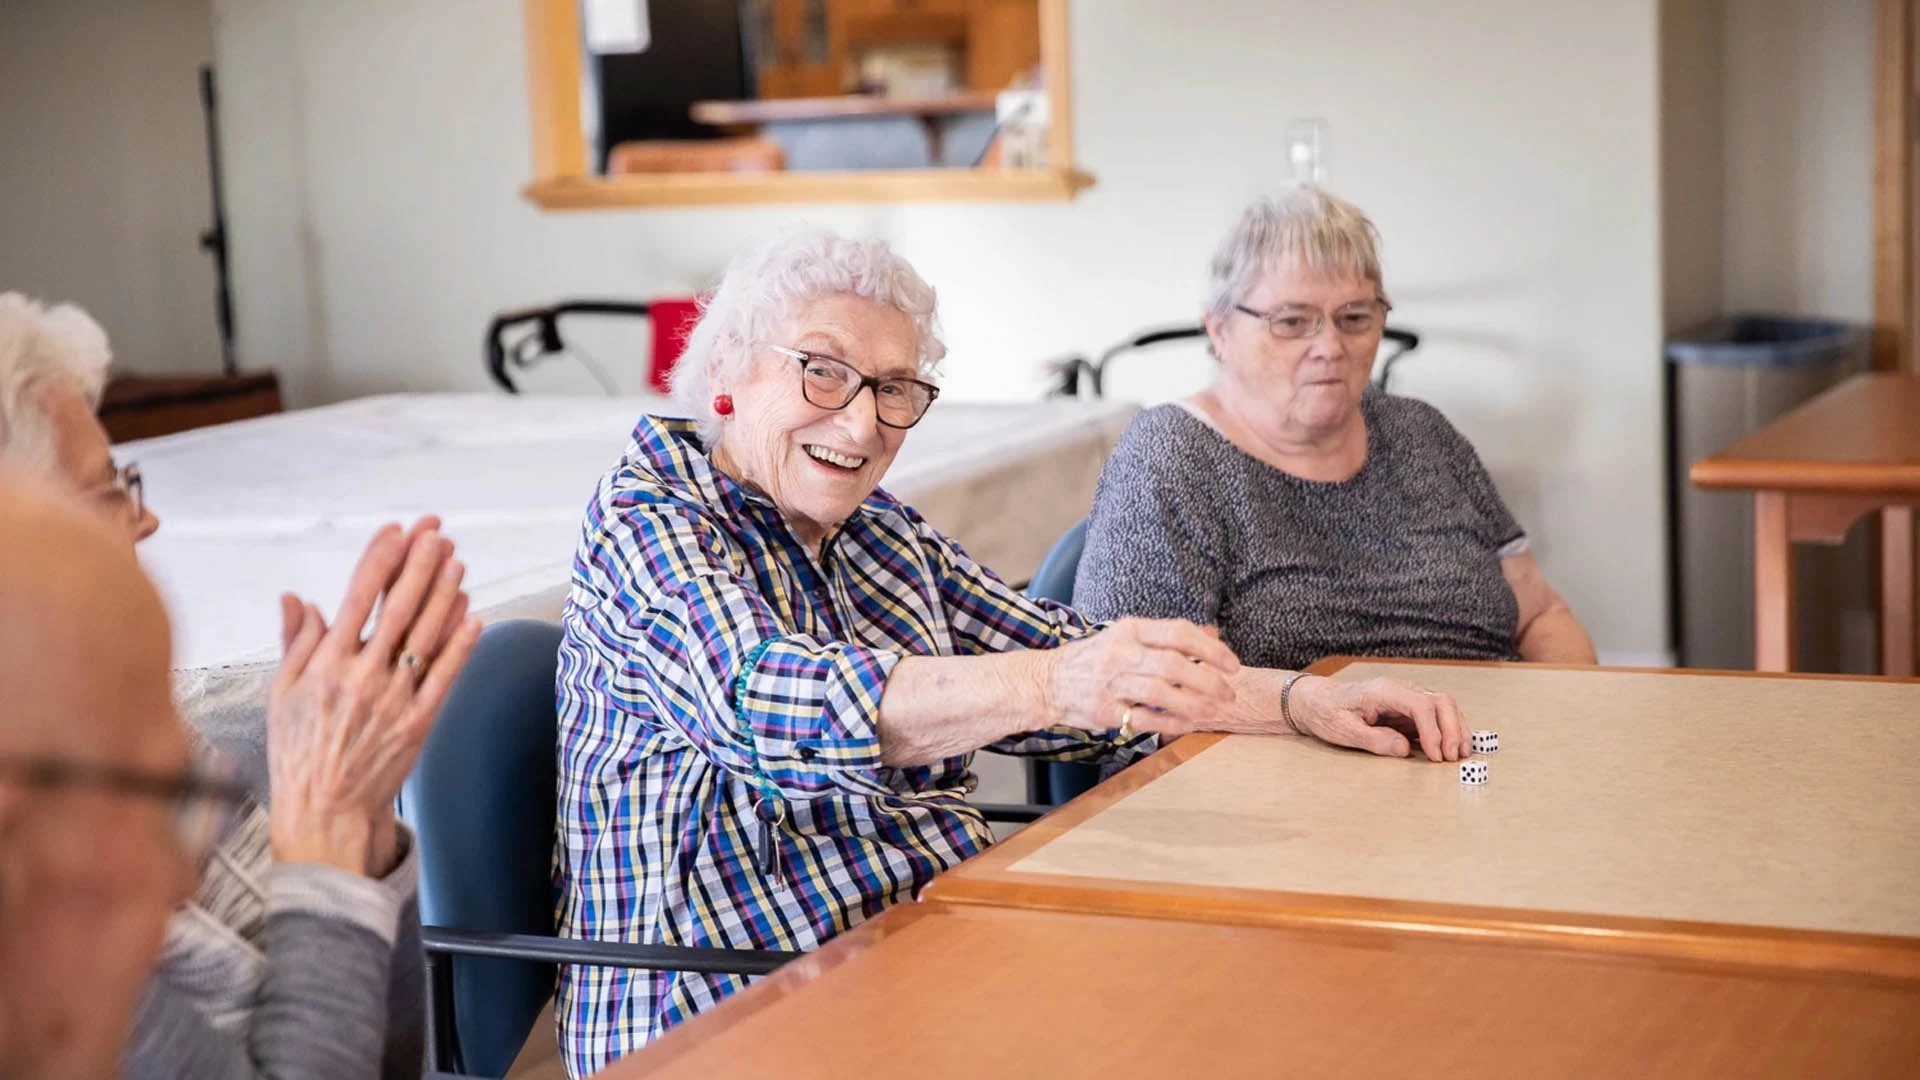 A group of elderly women clapping at a table playing with dice.